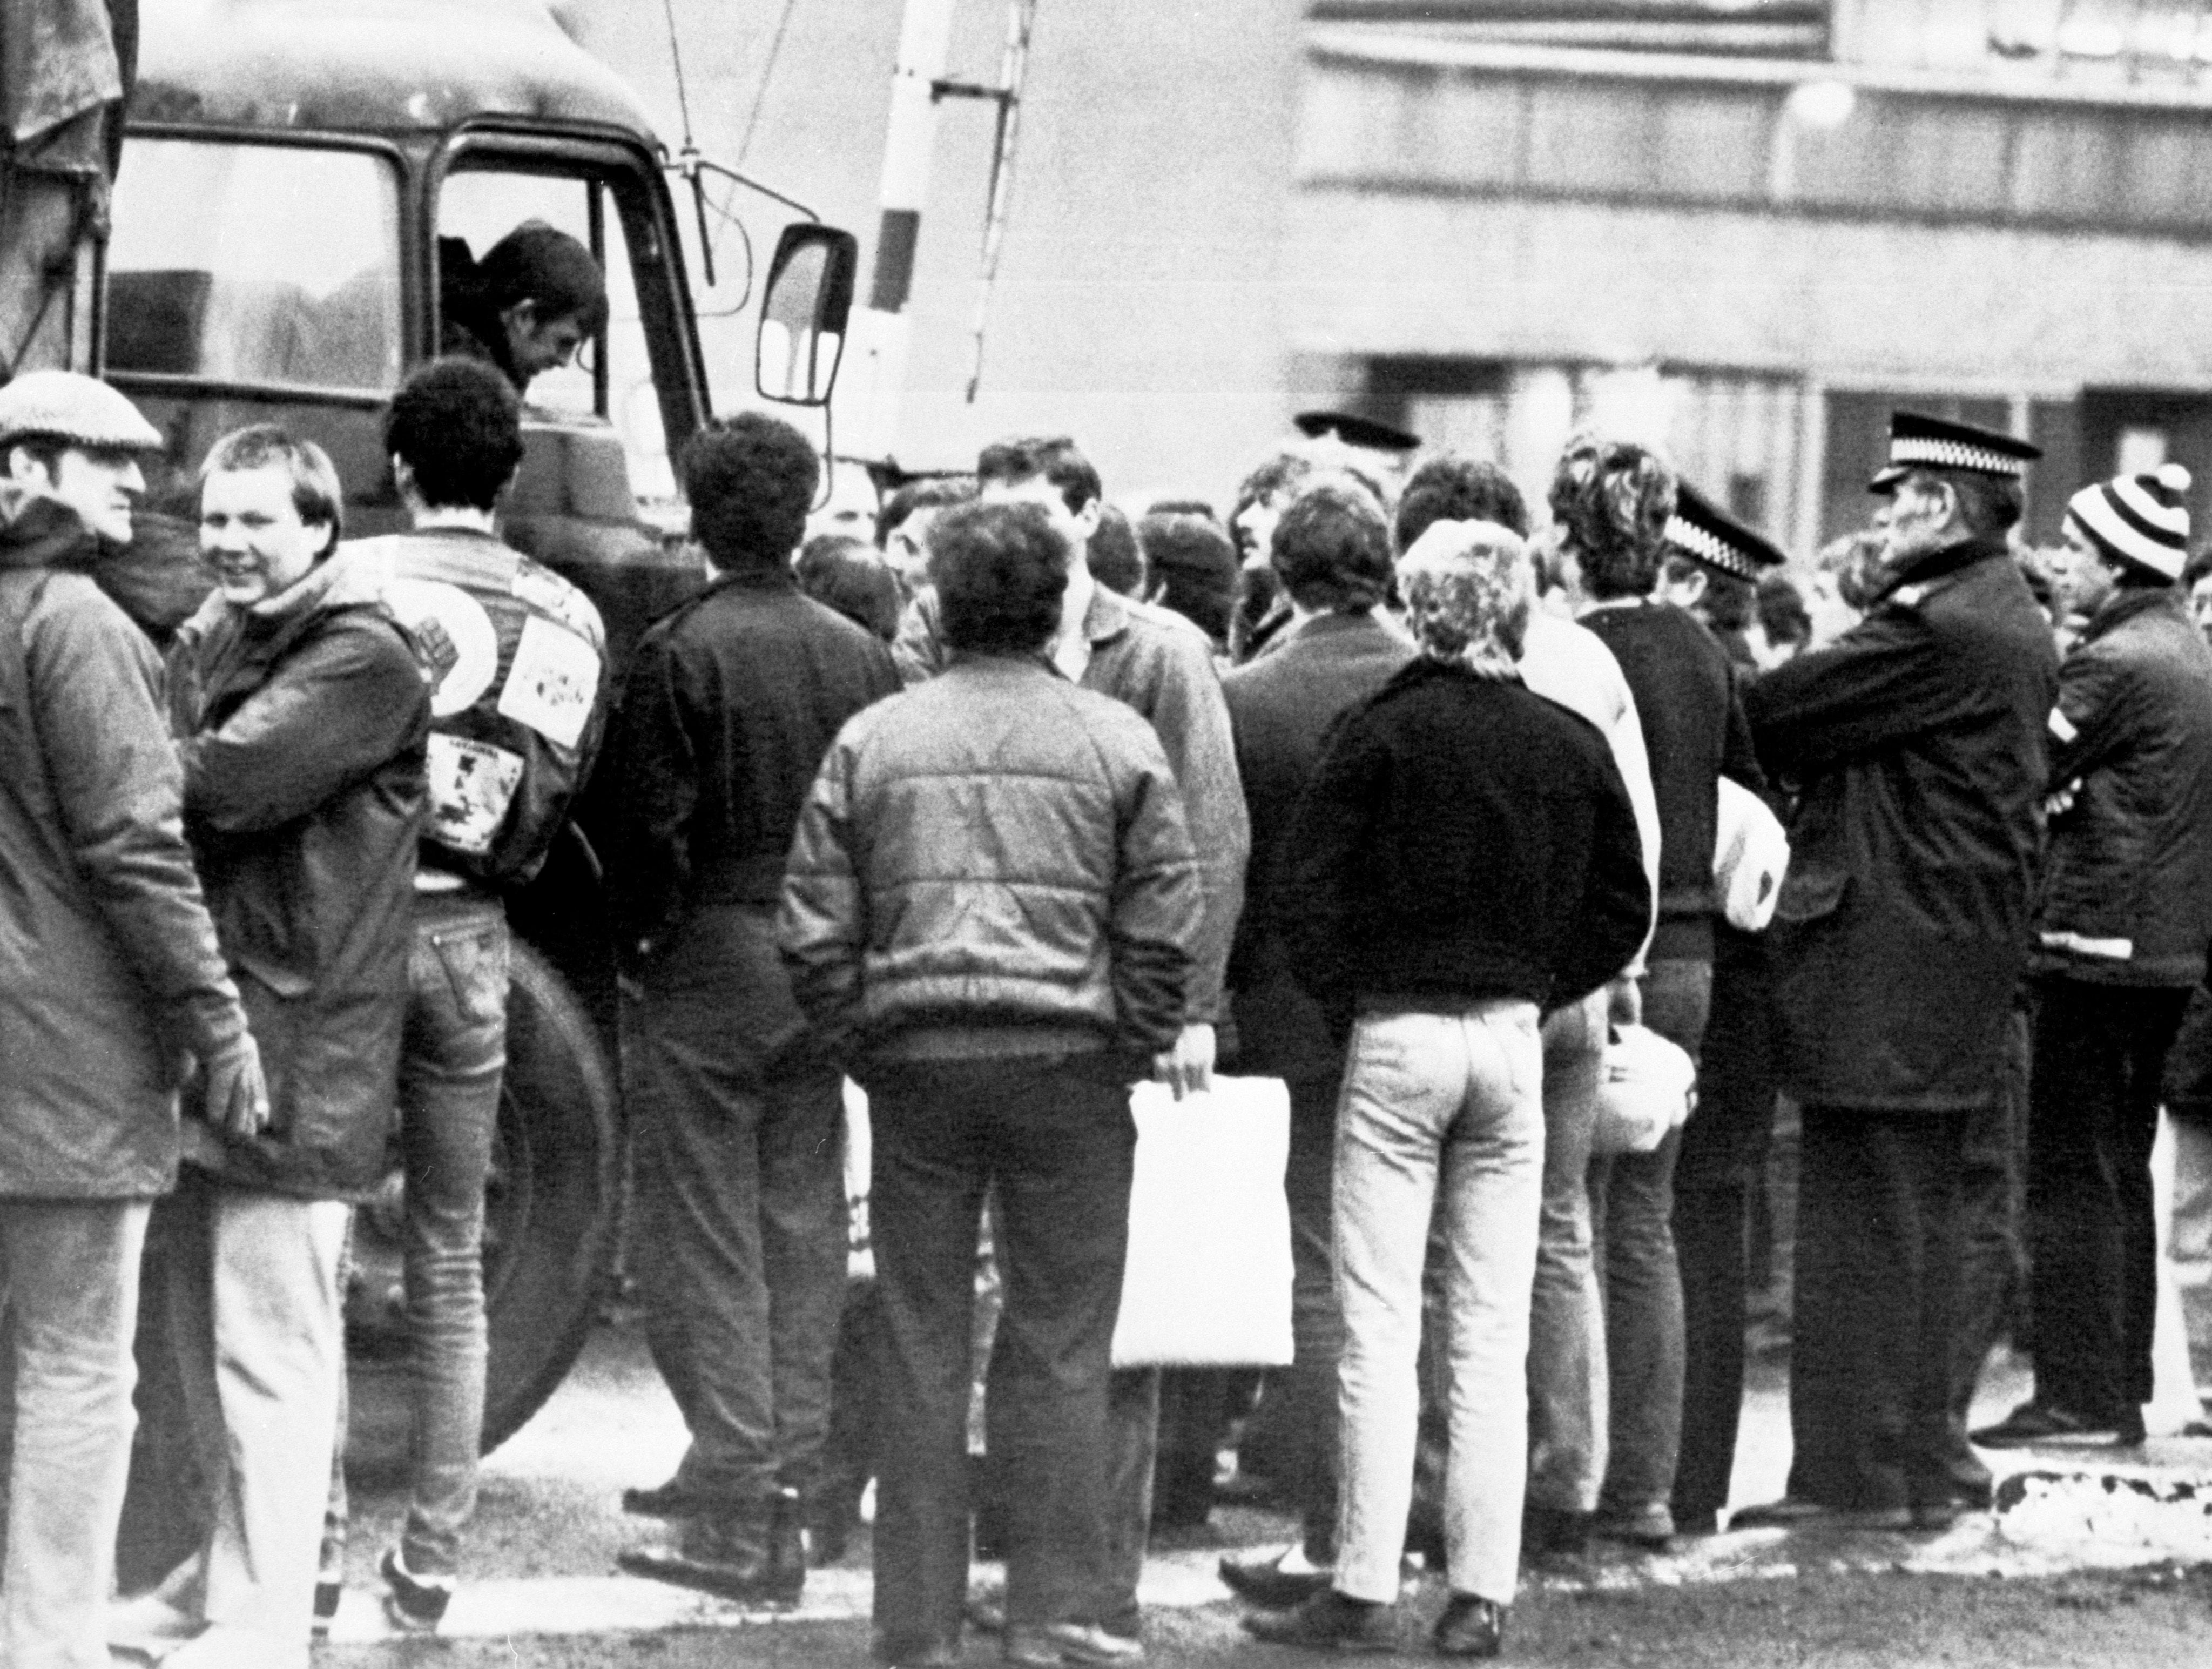 The scheme aims to pardon miners convicted of certain offences during the strike of 1984-85 (PA)